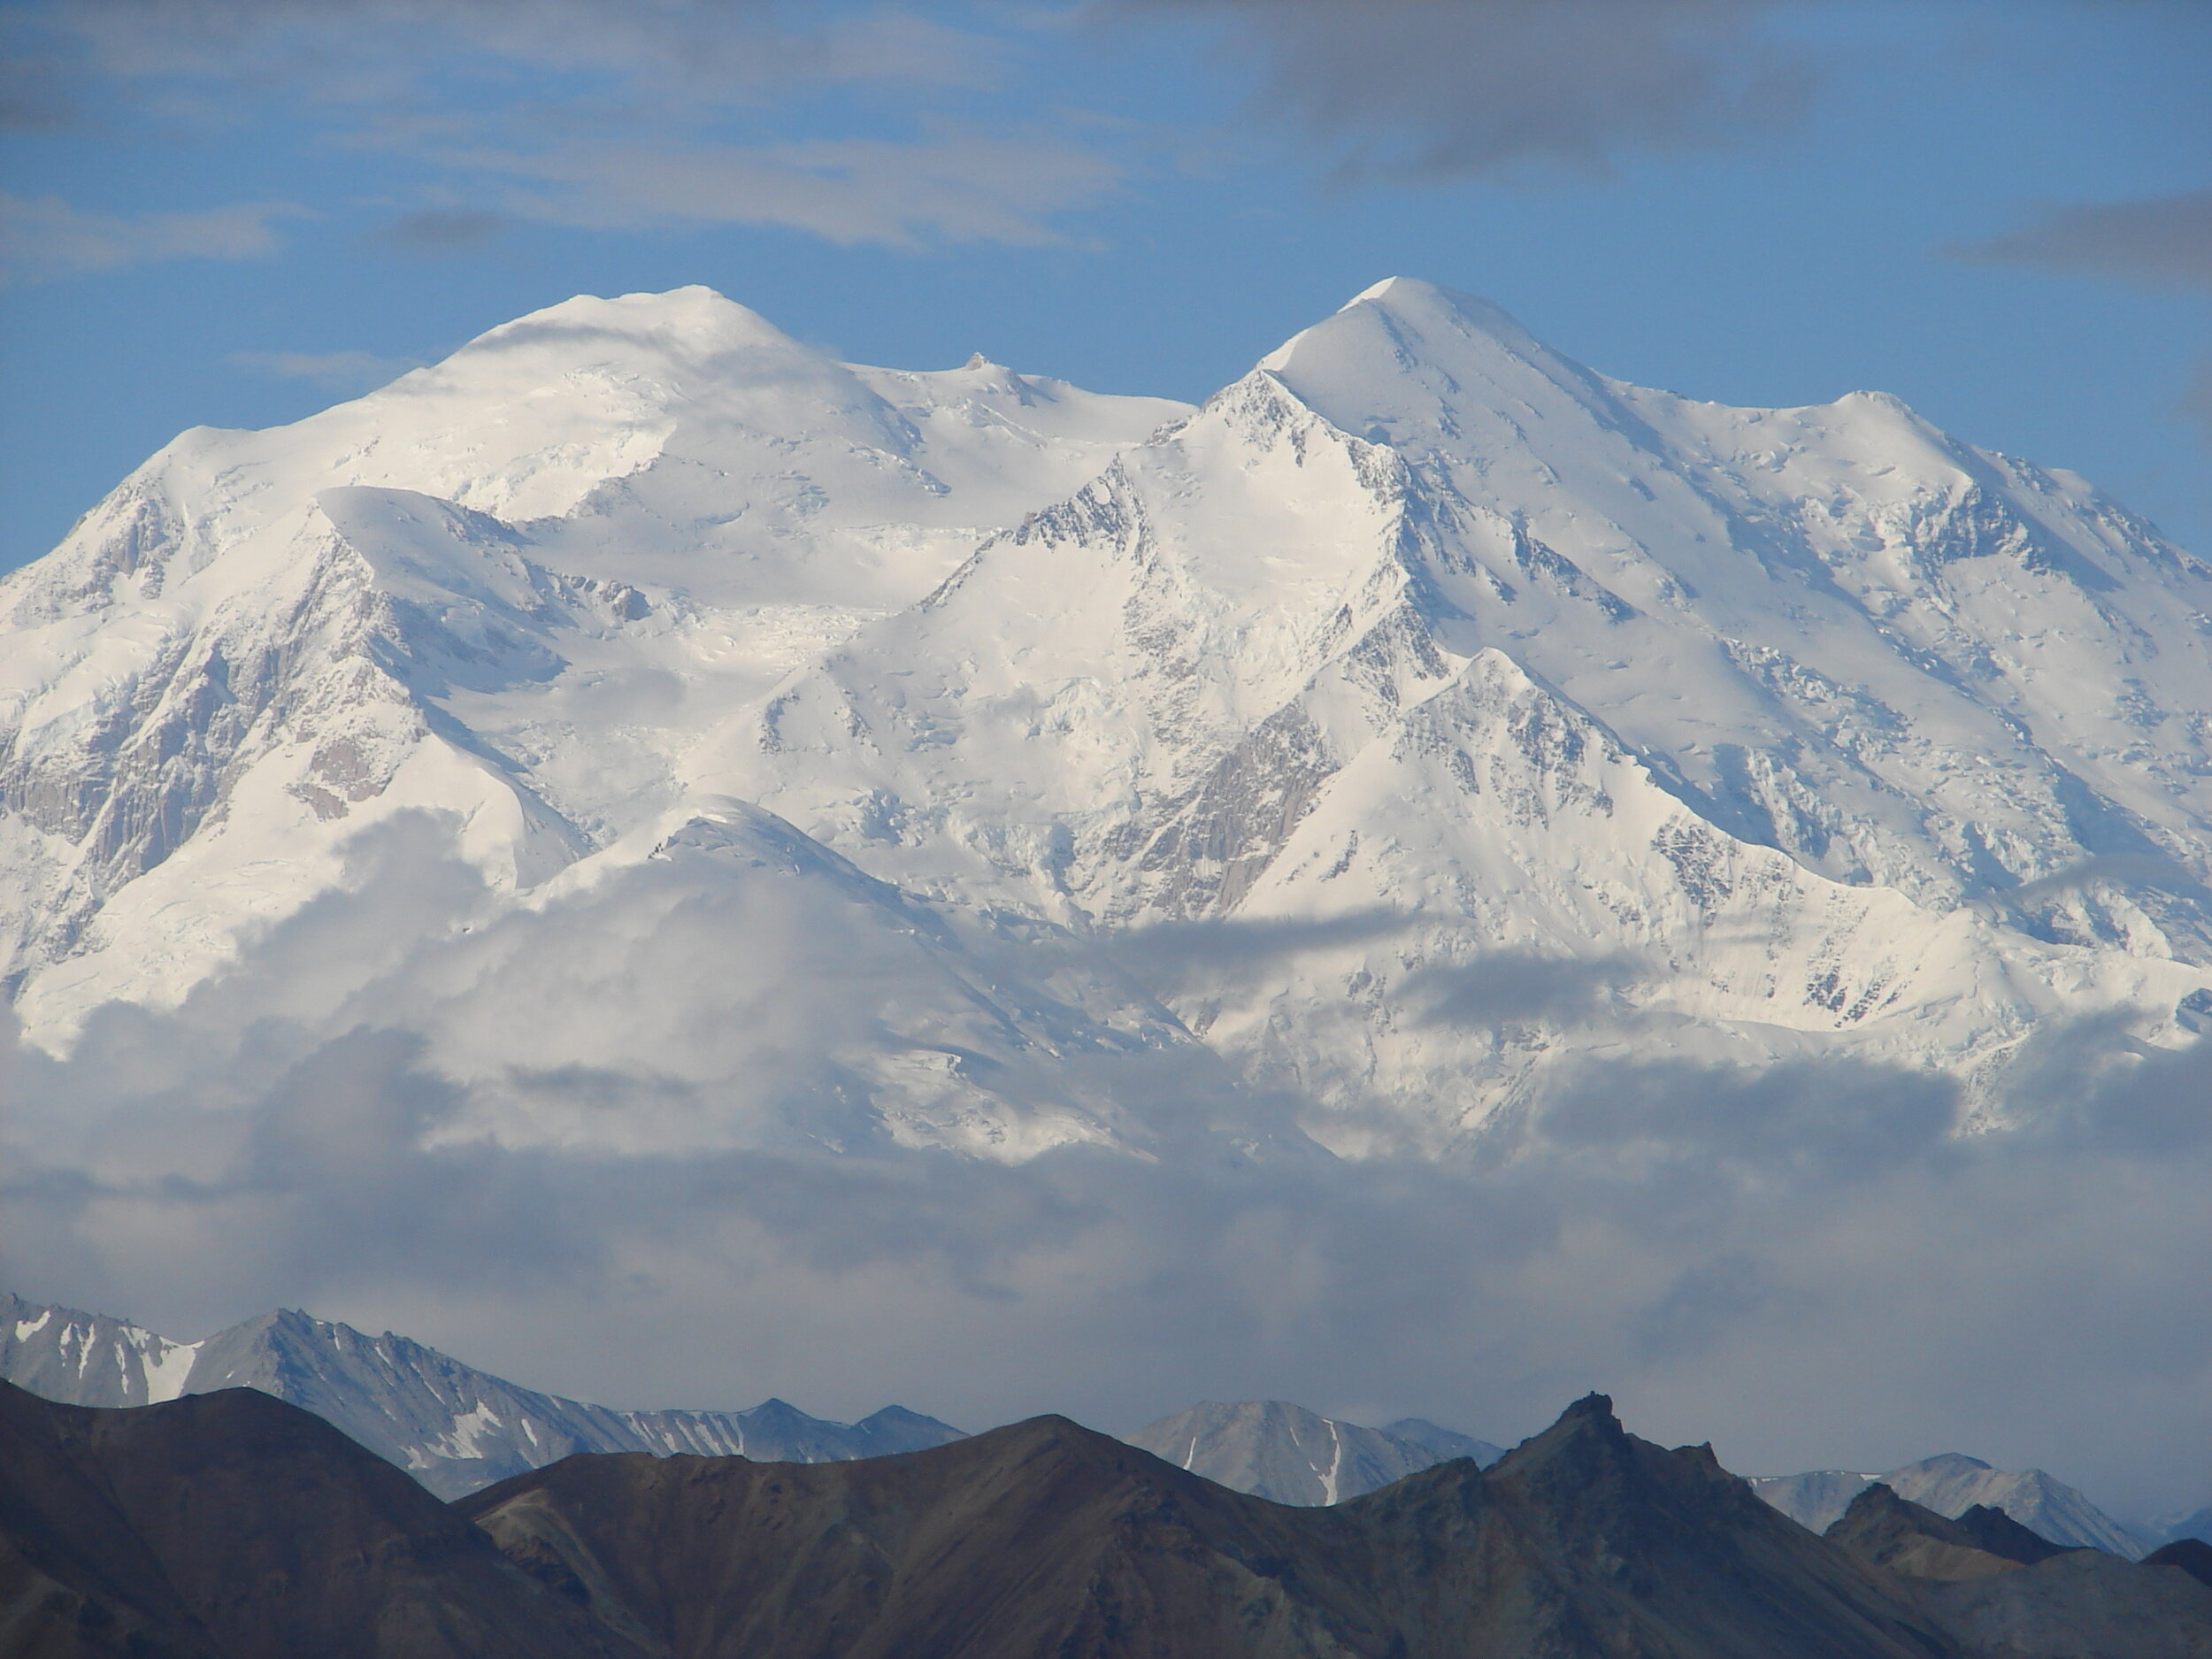 The dominating feature of the park is Denali—at 20,300 feet, the highest mountain in North America.